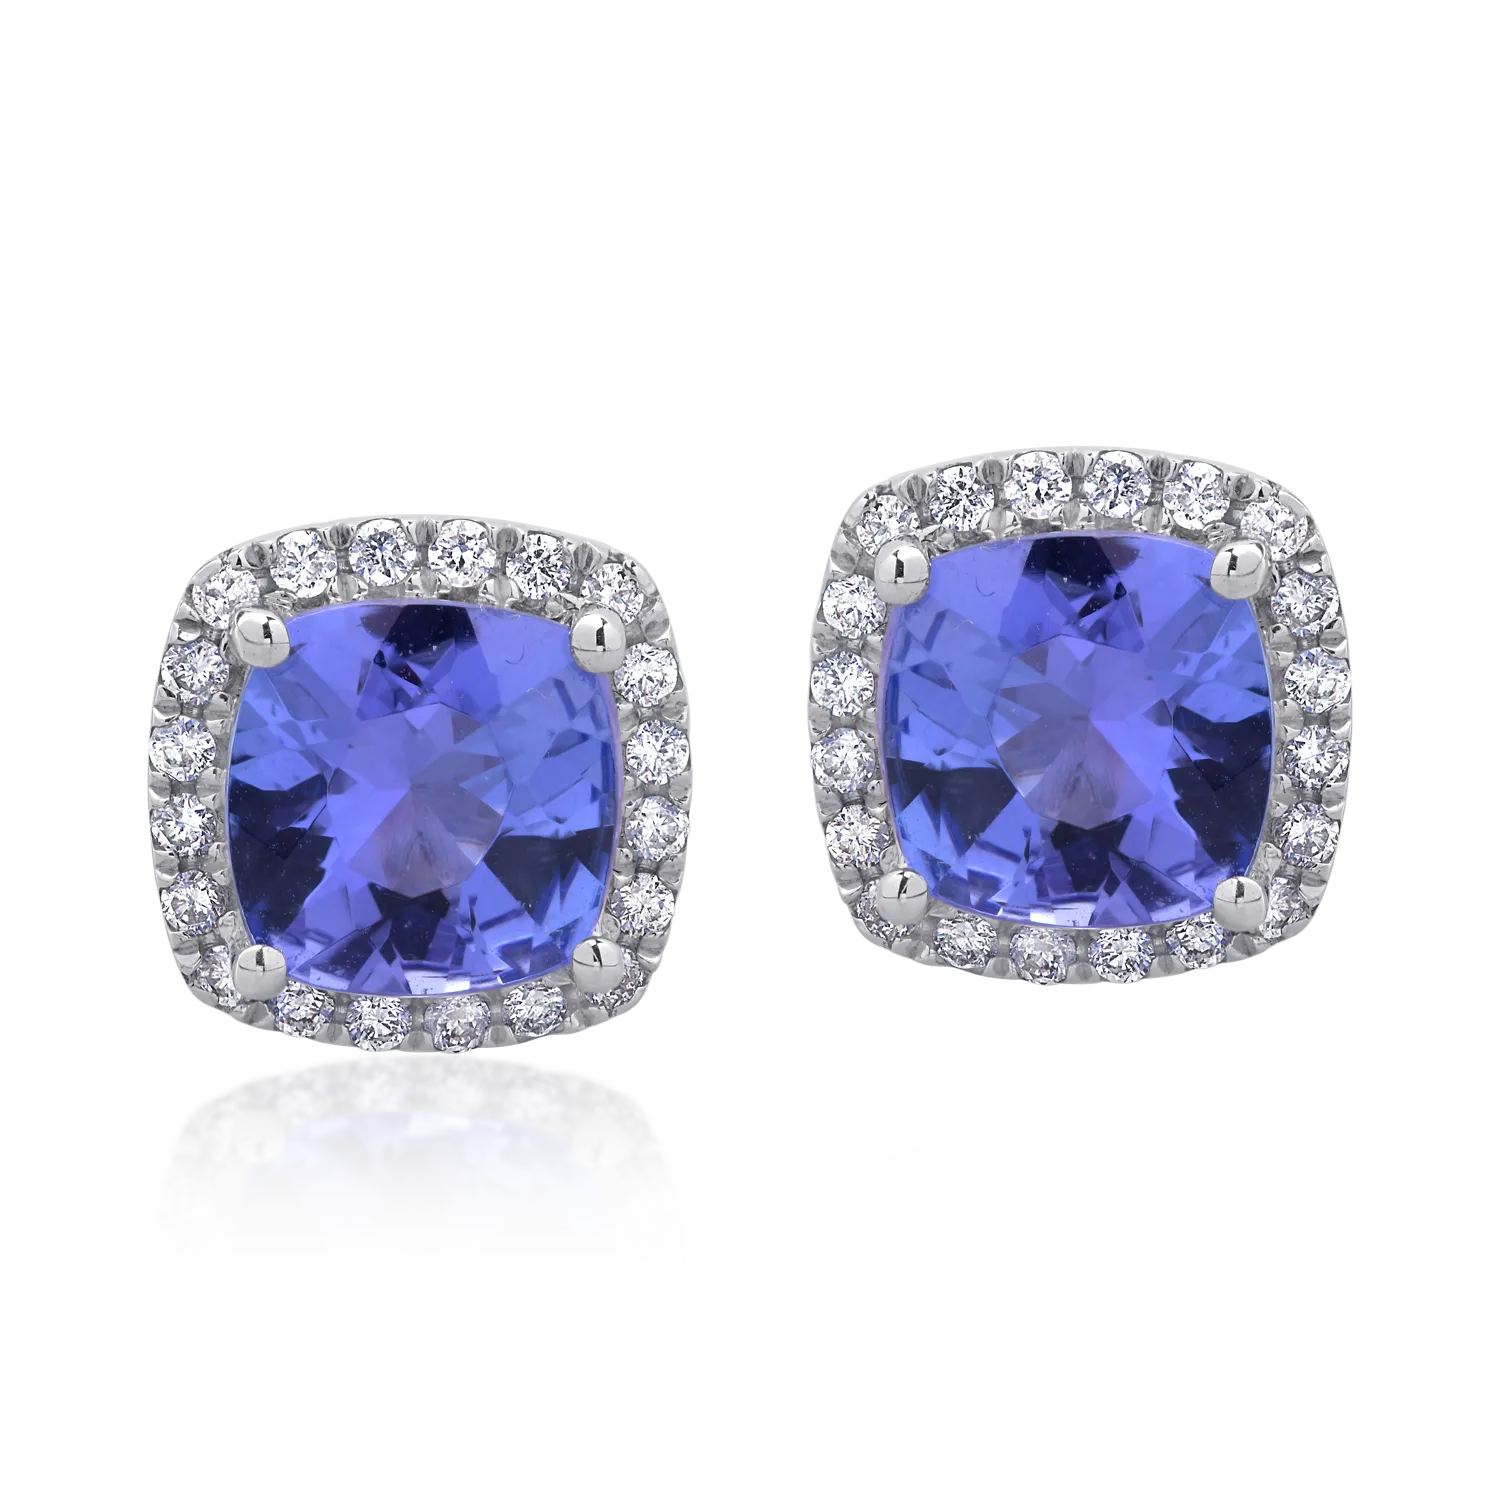 18K white gold earrings with 2.84ct tanzanites and 0.26ct diamonds